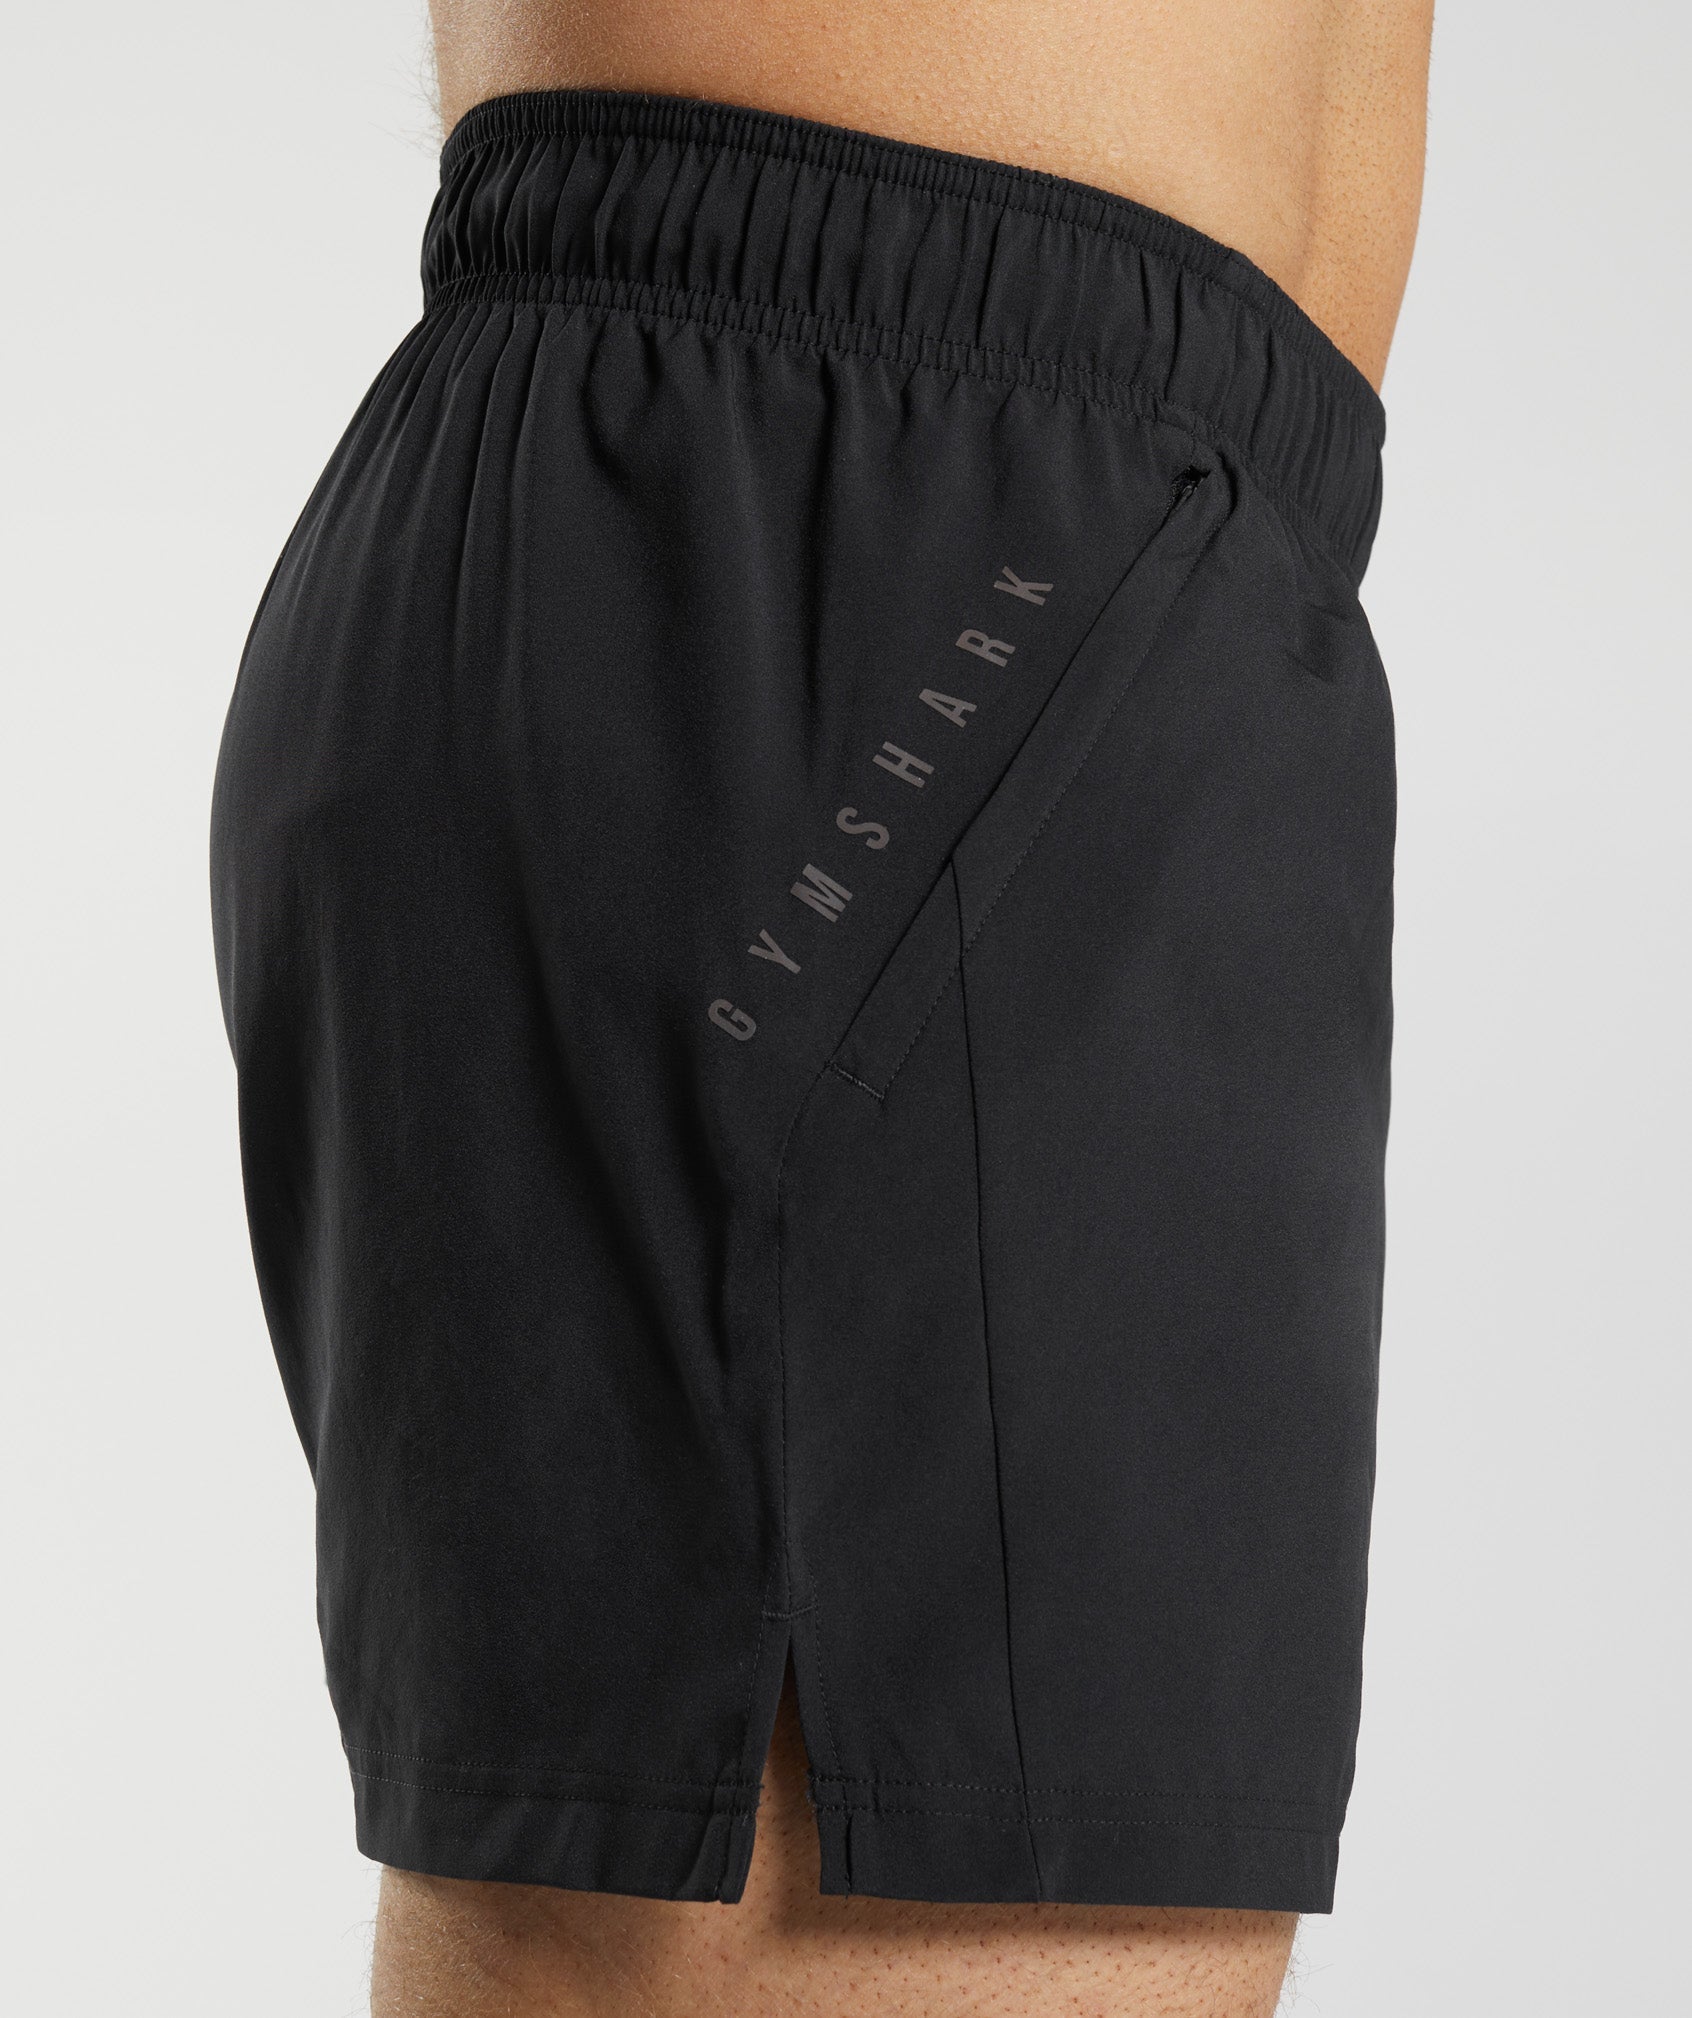 Sport 5" Shorts in Black - view 5